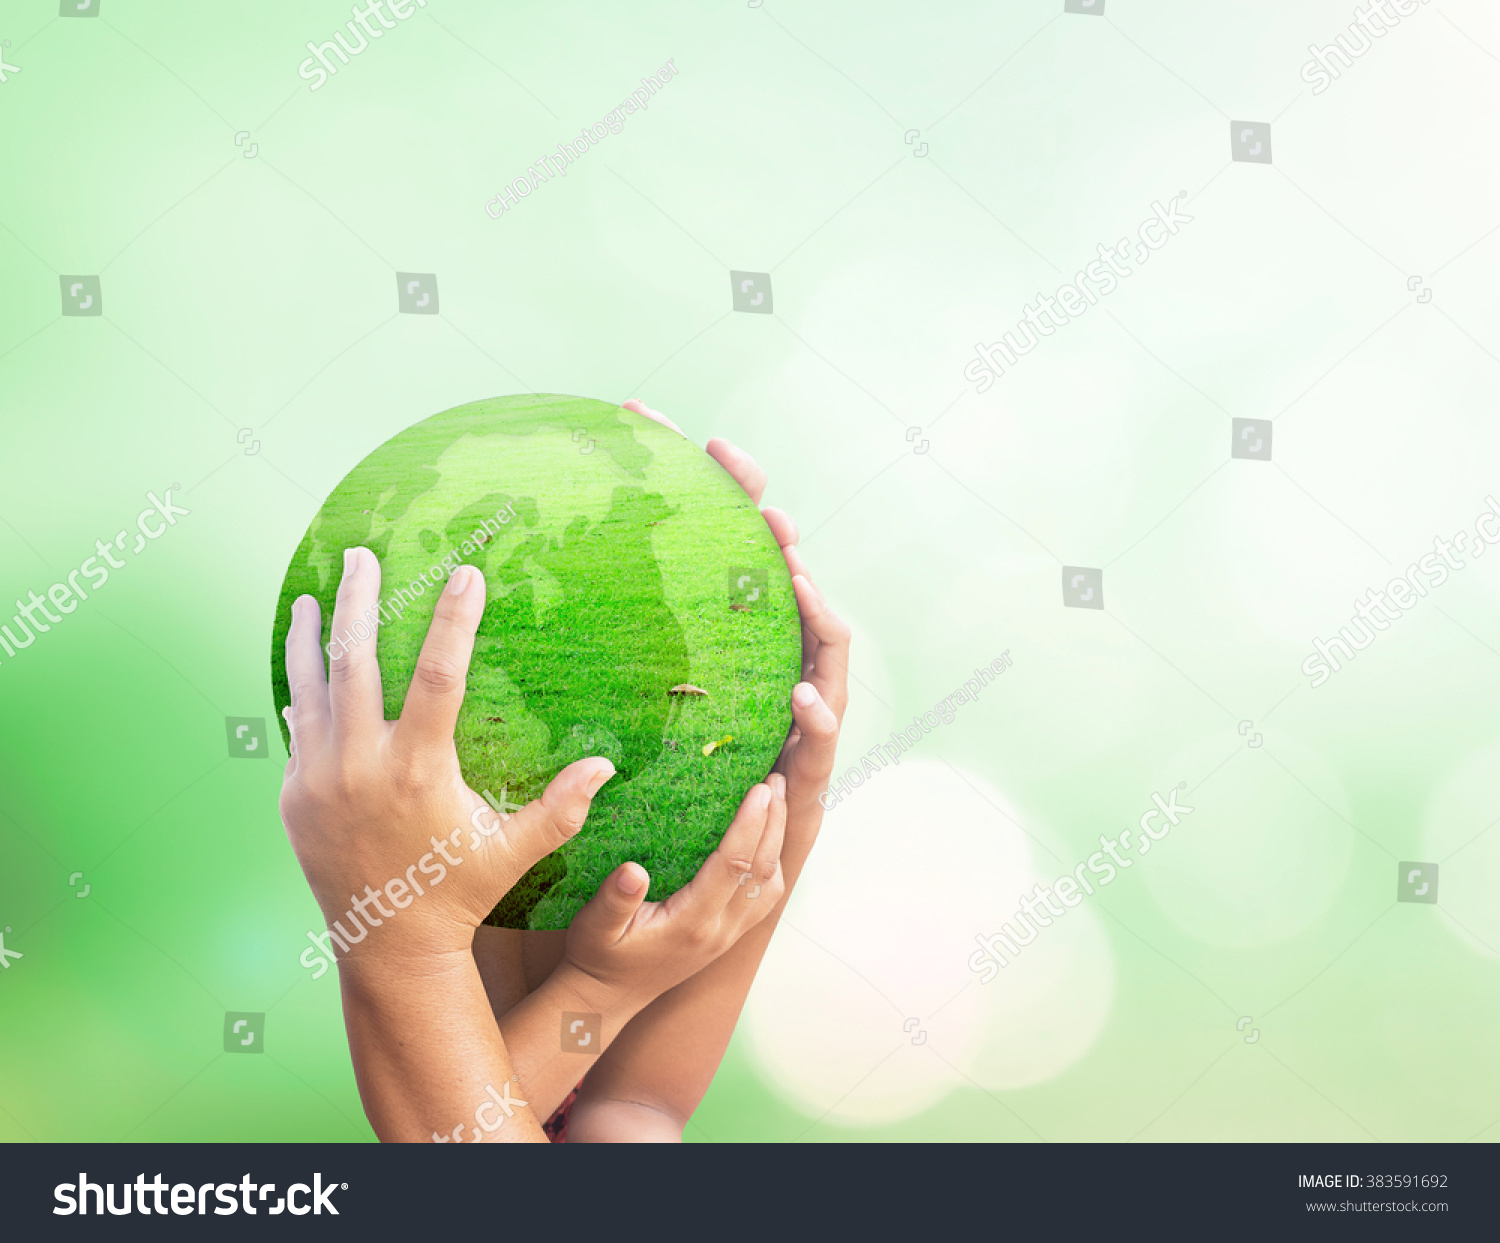 World environment day concept: Many people hands holding earth globe of grass over blurred green nature background #383591692